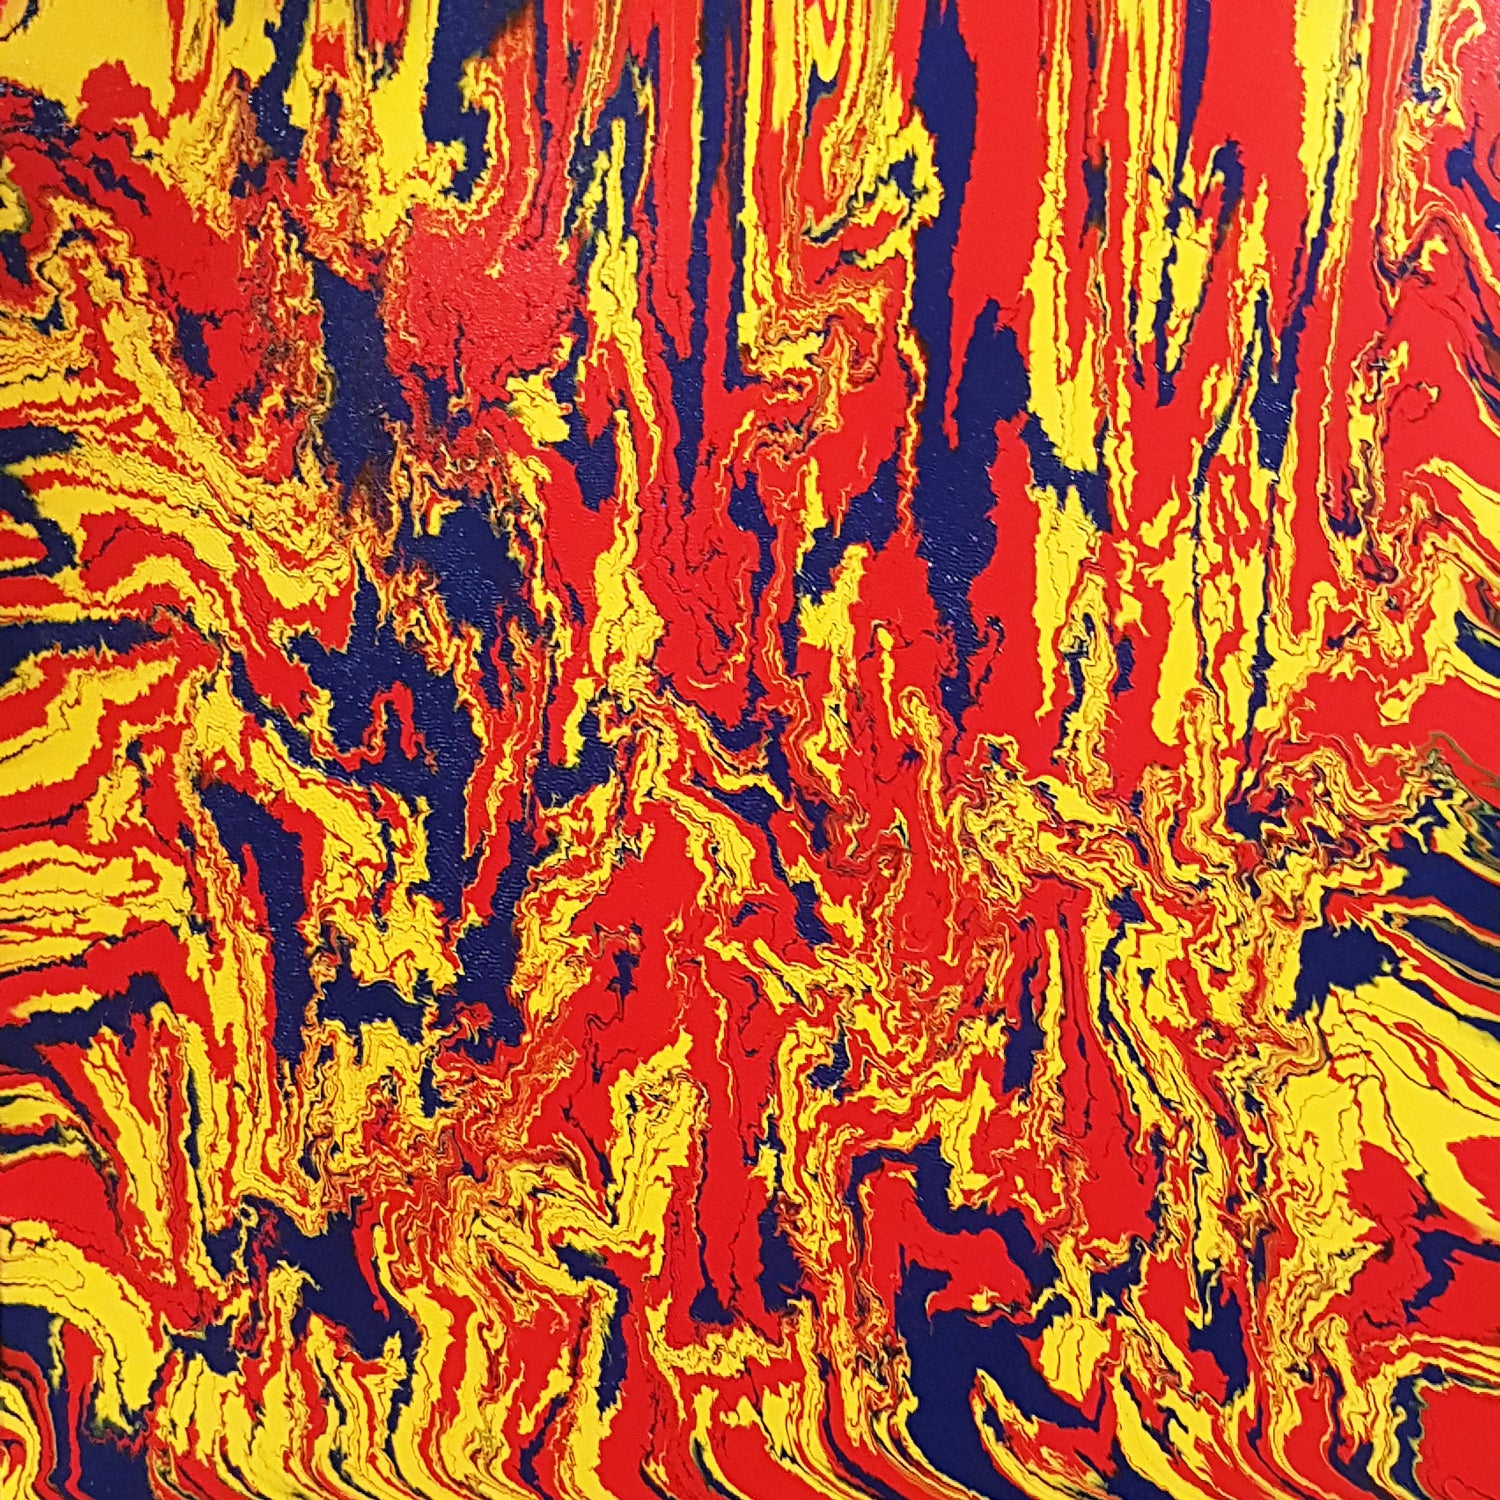 Primary-Bliss-by-Alexandra-Romano-Original-Abstract-Painting-Primary-Colors-Blue-Red-Yellow-Art-Gallery-Toronto